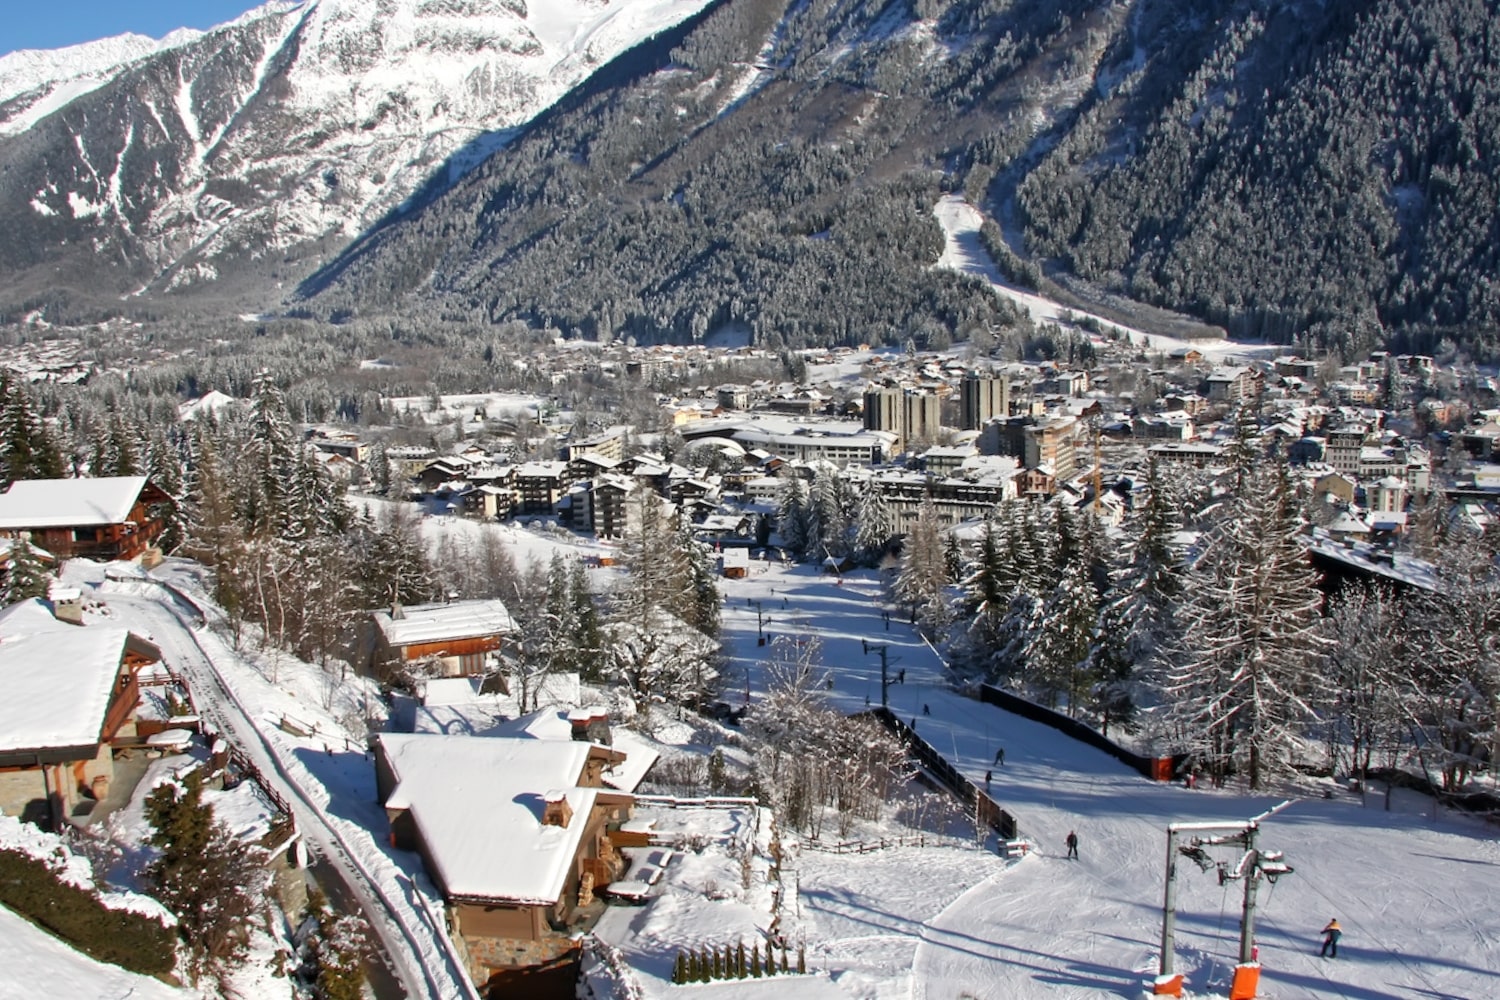 The Ultimate Guide to Chamonix